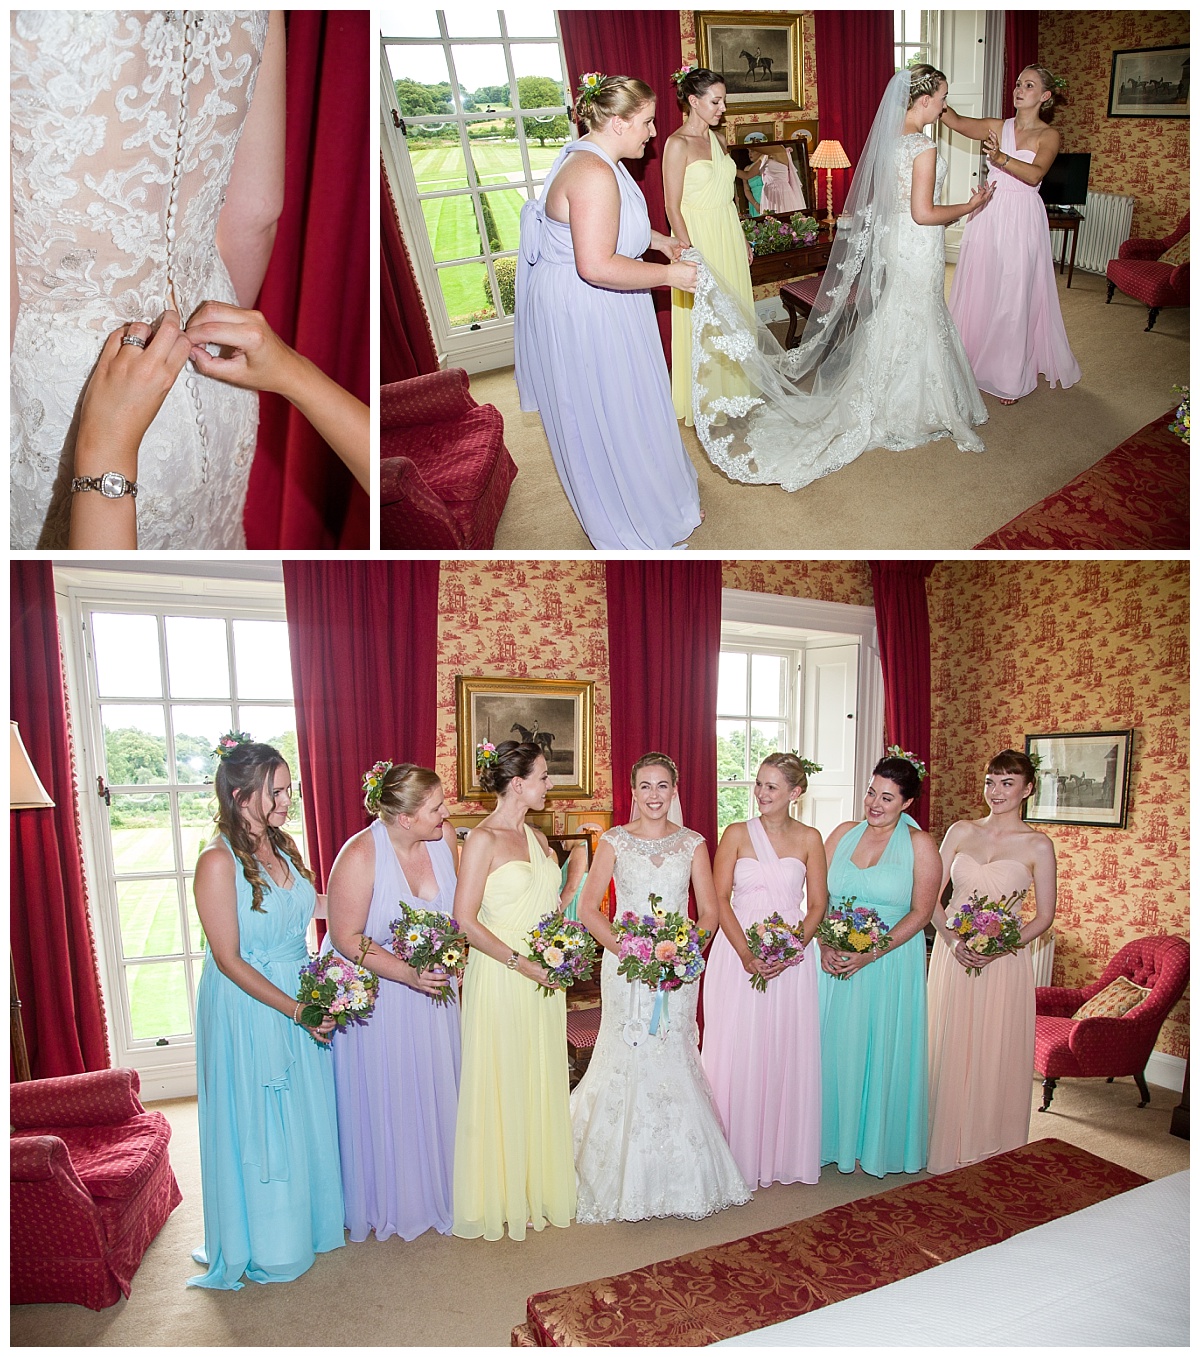 Wedding Photography Manchester - Mel and Lewis's Knowsley Hall wedding 10